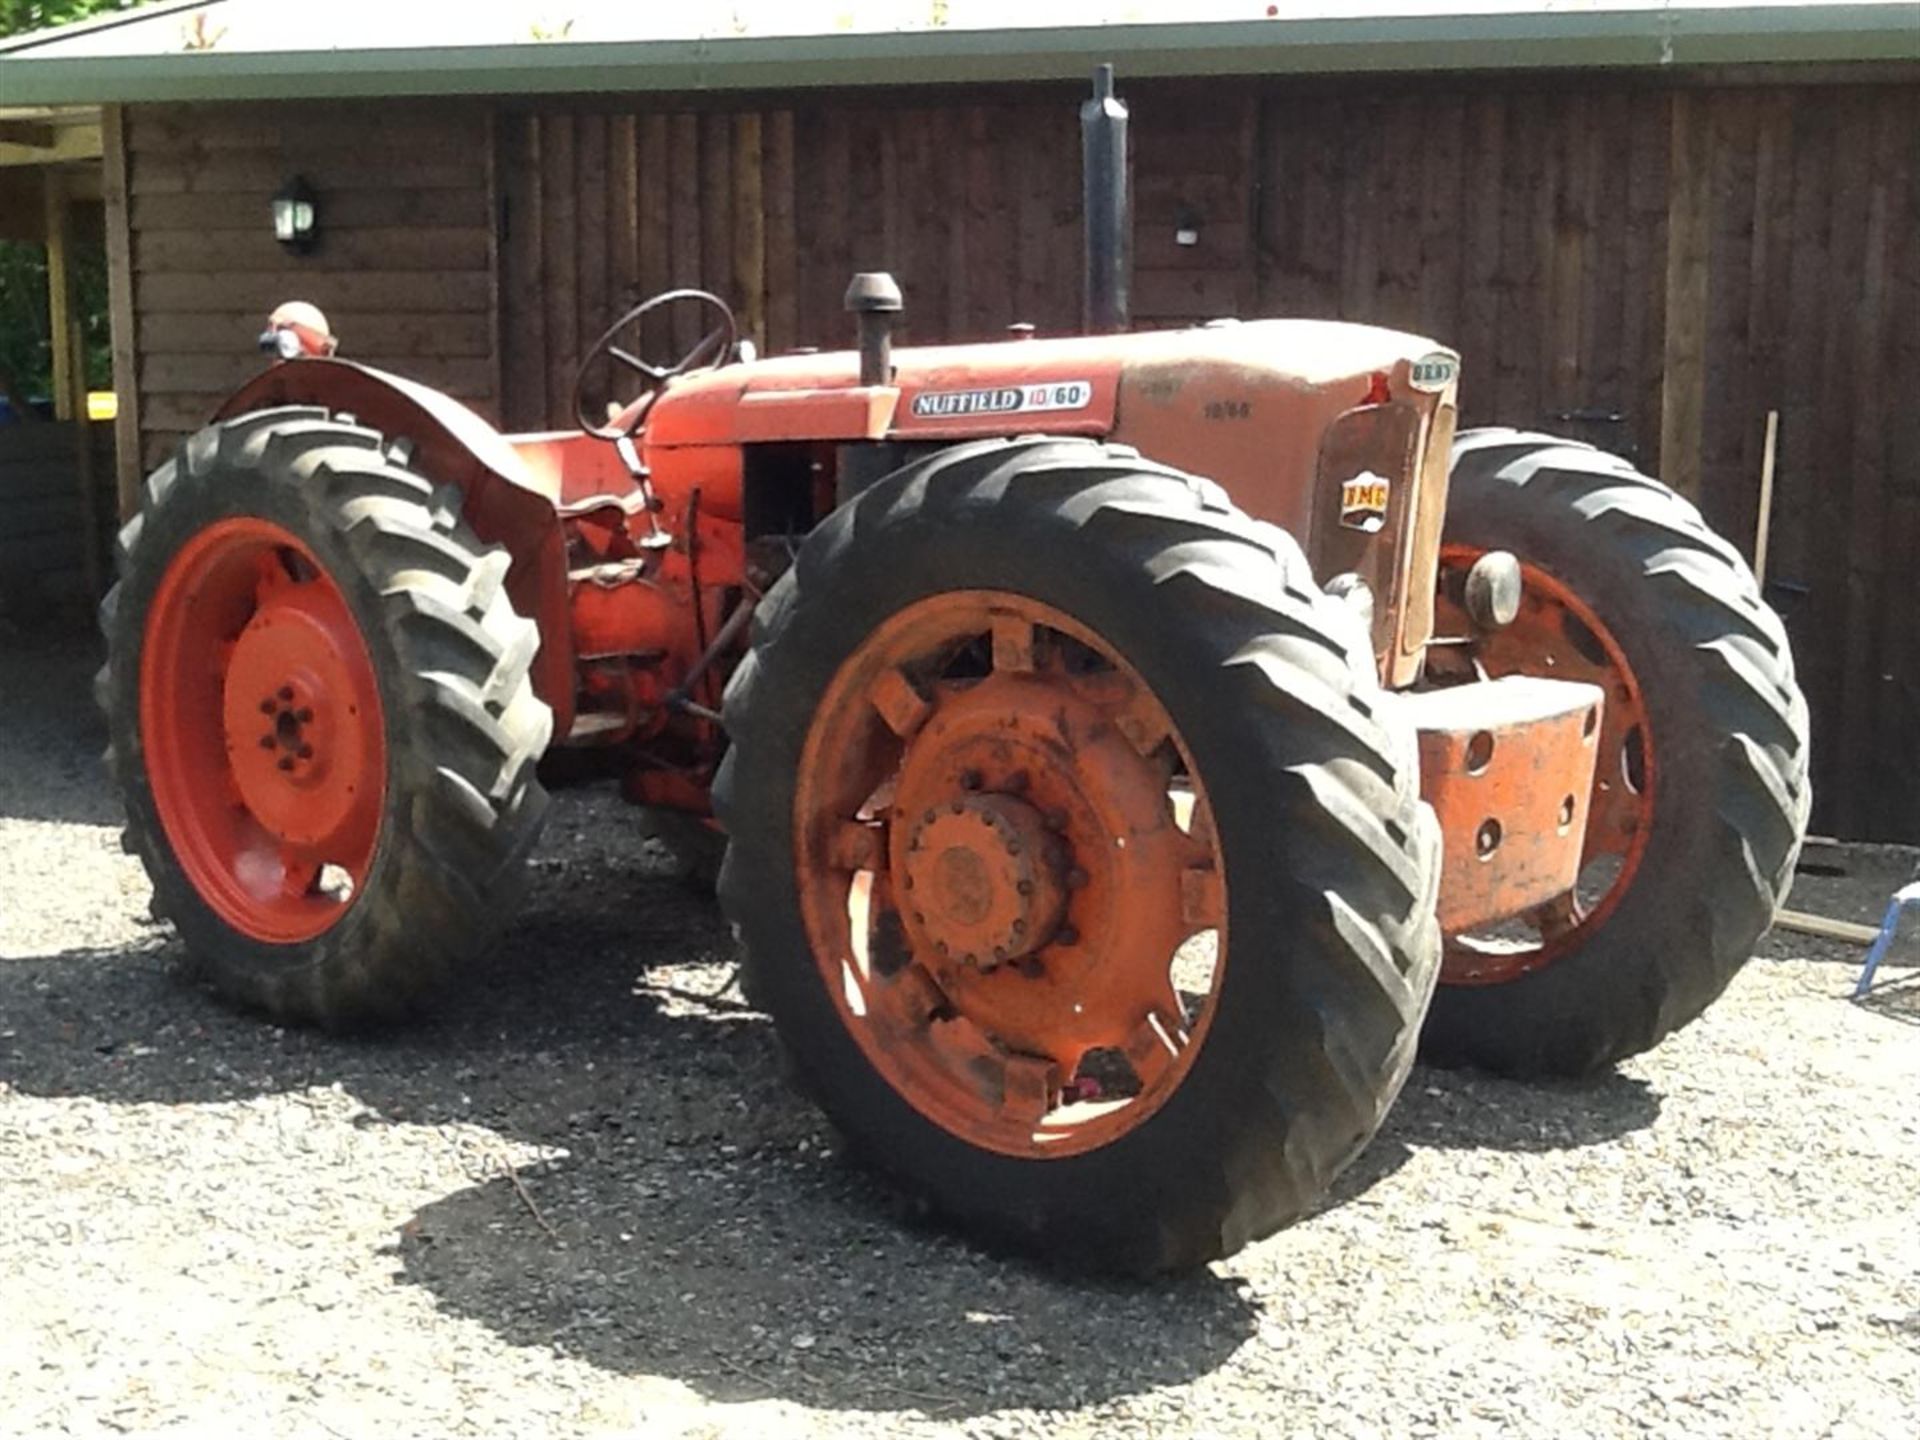 1967 NUFFIELD BRAY 10/60 4cylinder diesel TRACTOR Serial No: 60N/685473 Fitted with a Bray 4x4 front